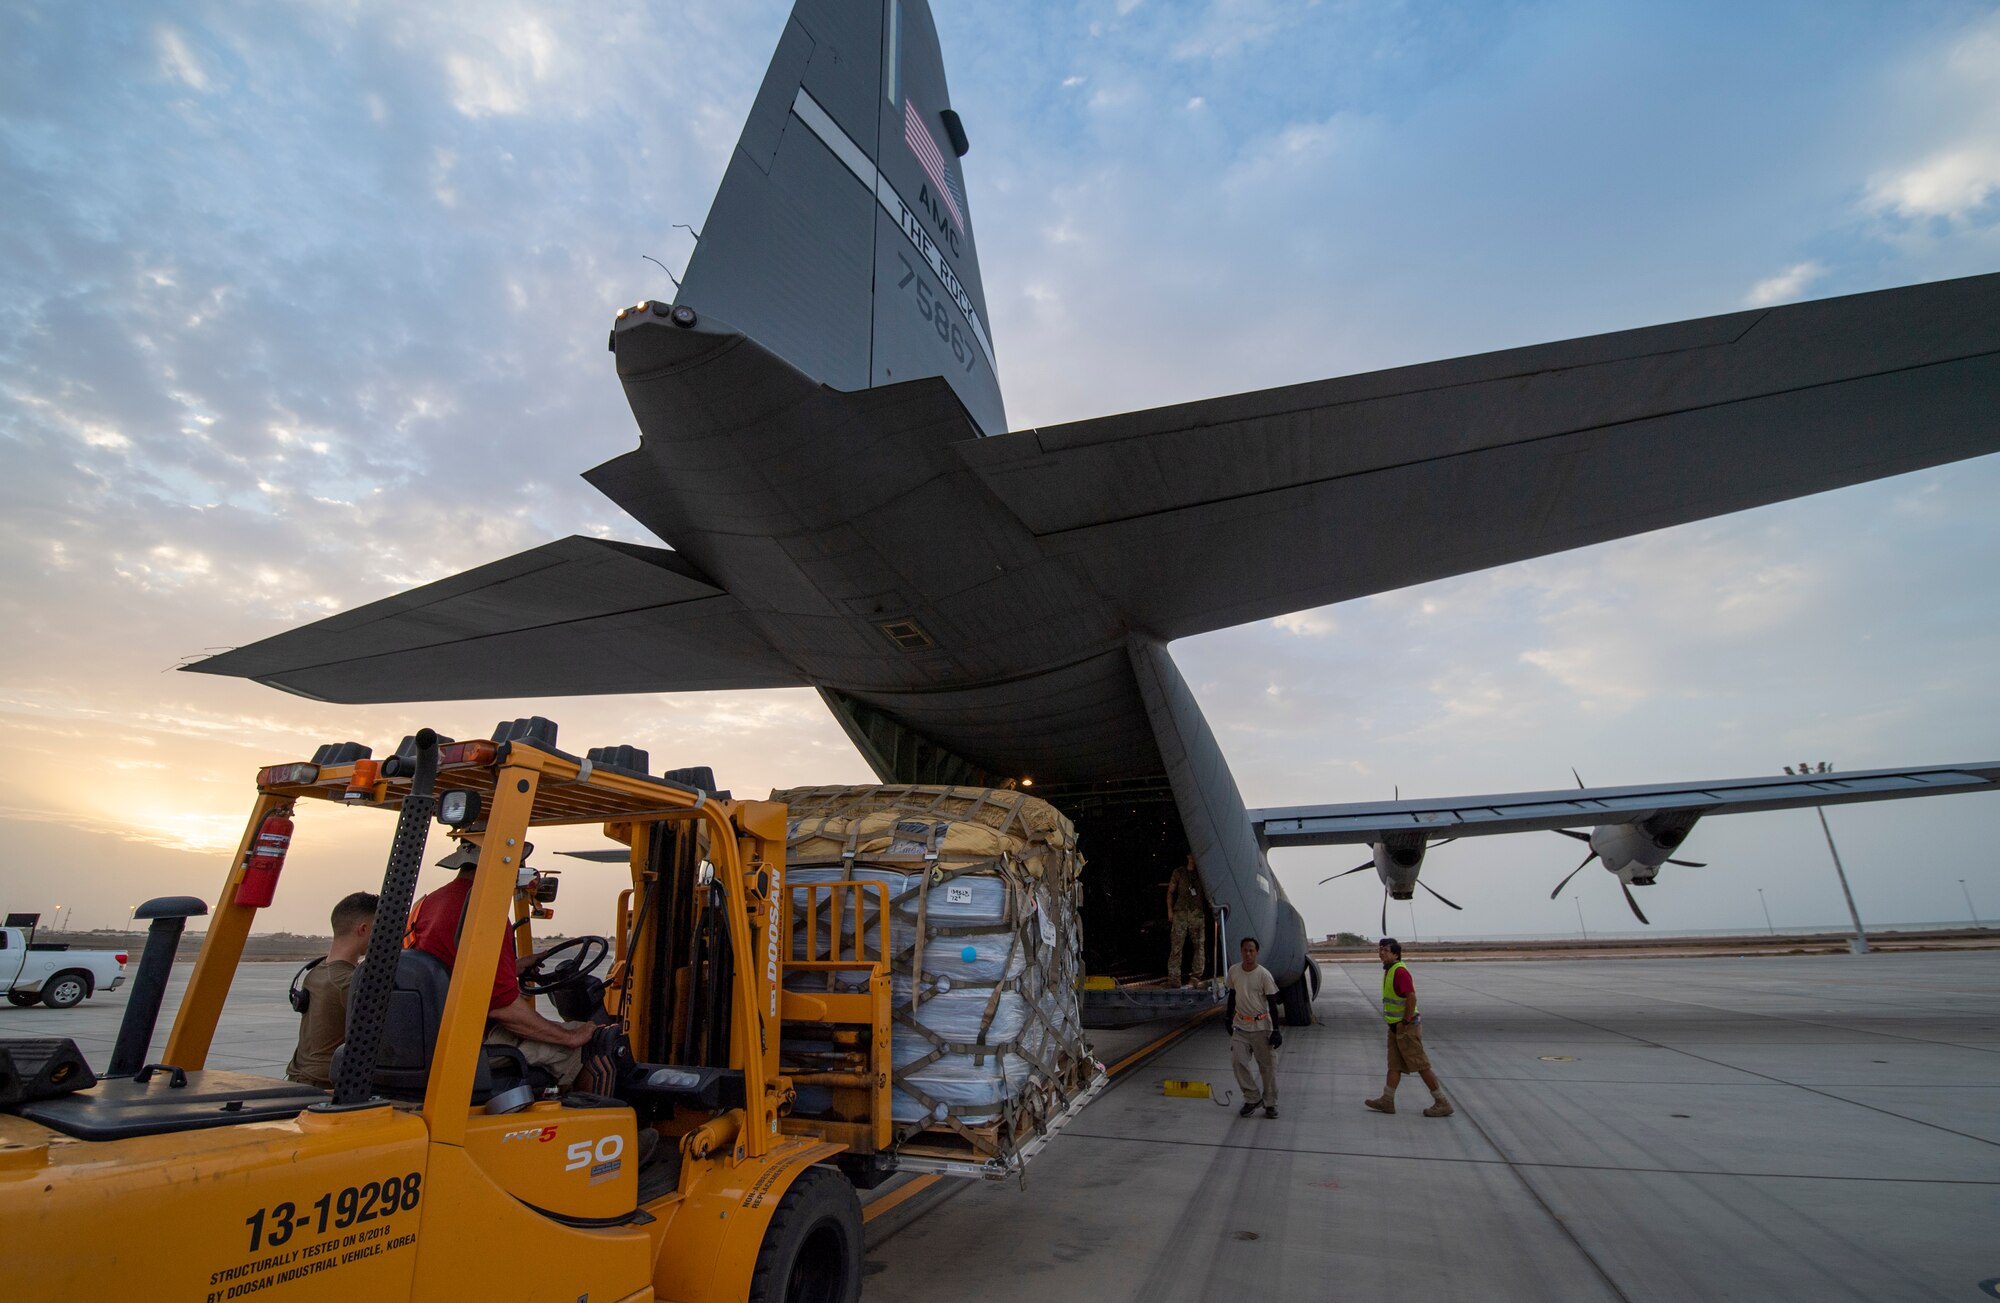 Cargo is loaded onto a U.S. Air Force C-130J Super Hercules assigned to the 75th Expeditionary Airlift Squadron (EAS) at Camp Lemonnier, Djibouti, June 28, 2020. The 75th EAS provides strategic airlift capabilities across the Combined Joint Task Force - Horn of Africa (CJTF-HOA) area of responsibility. (U.S. Air Force photo by Tech. Sgt. Christopher Ruano)